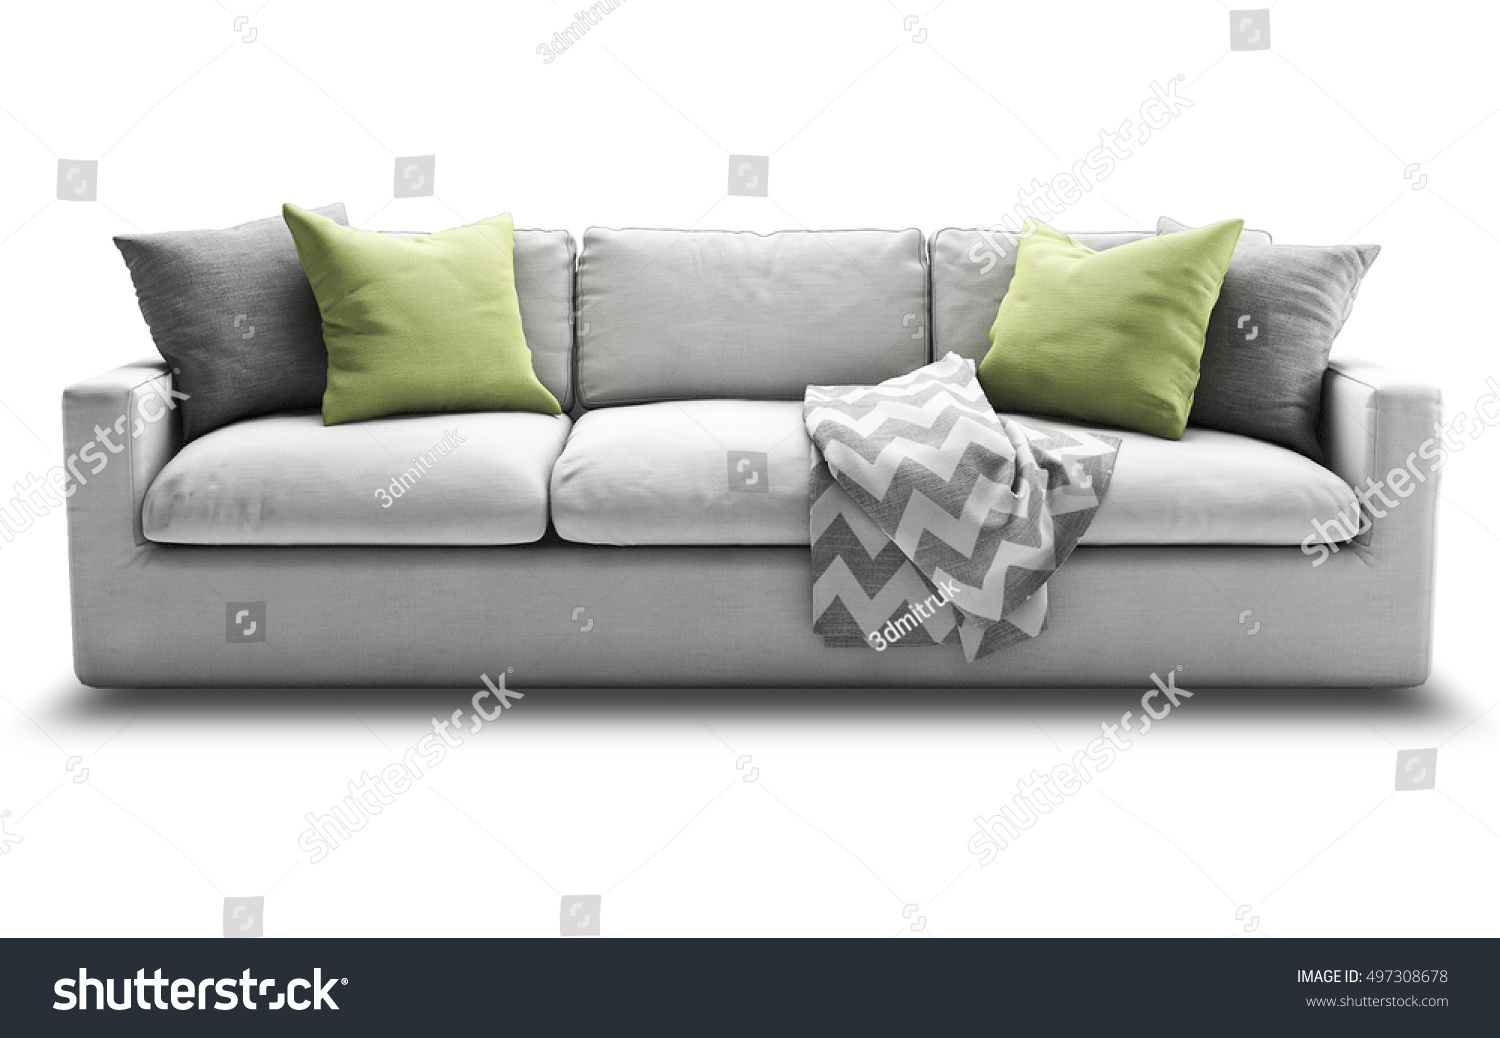 Light gray fabric three-seat modern sofa with gray and green pillows and plaid #497308678